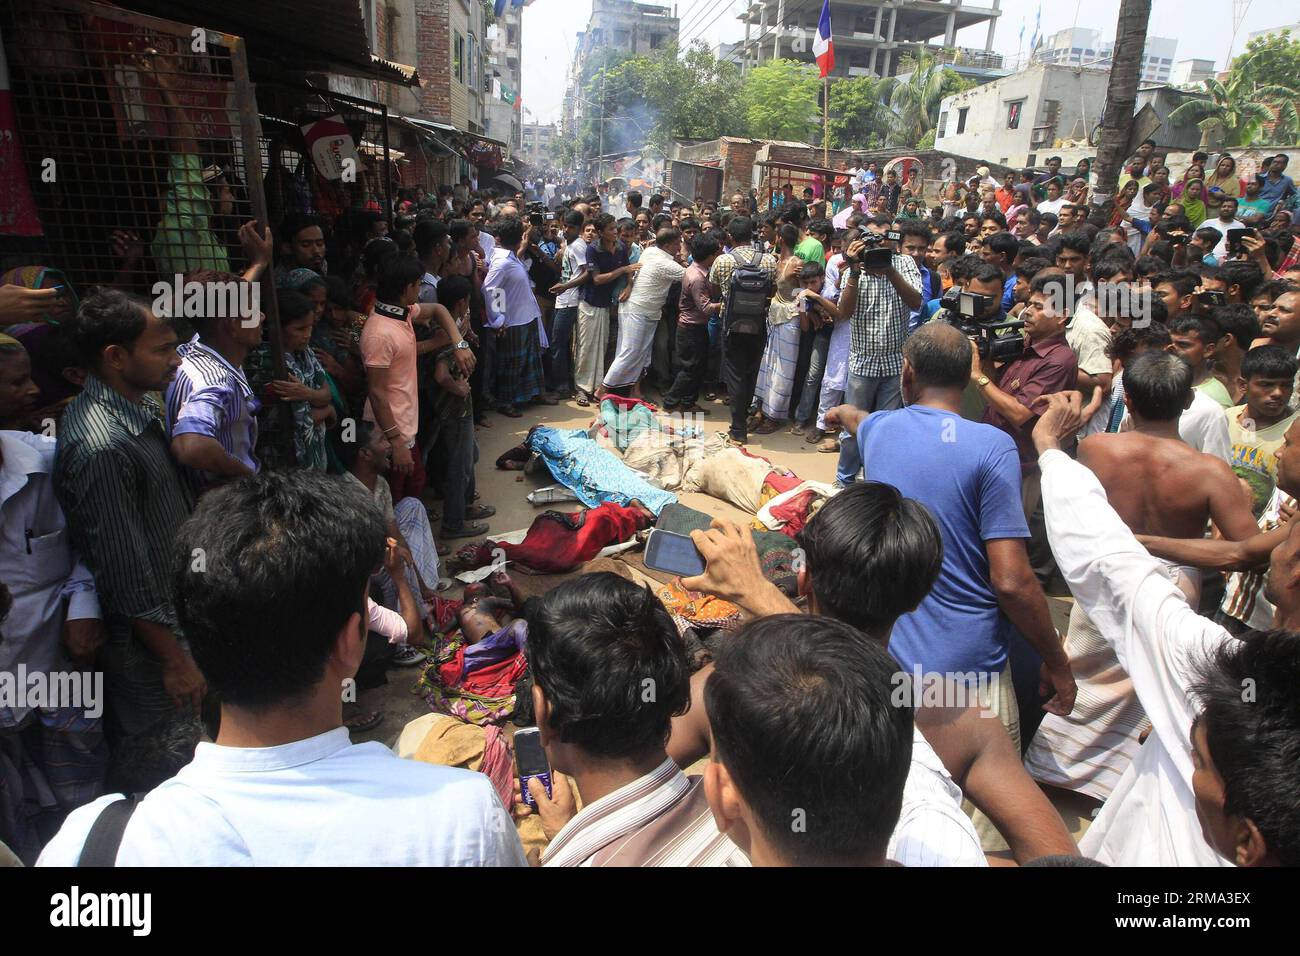 (140614) -- DHAKA, June 14, 2014 (Xinhua) -- Local people watch bodies of victims on a street following a clash at a refugee camp in Dhaka, Bangladesh, June 14, 2014. At least nine people including three children and two women were burnt to death in a devastating fire during a series of violent and chaotic clashes at a refugee camp of Biharis, or stranded Pakistanis in Bangladesh s capital Dhaka on Saturday morning. (Xinhua/Shariful Islam) BANGLADESH-DHAKA-FIRE-REFUGEE PUBLICATIONxNOTxINxCHN   Dhaka June 14 2014 XINHUA Local Celebrities Watch Bodies of Victims ON a Street following a Clash AT Stock Photo